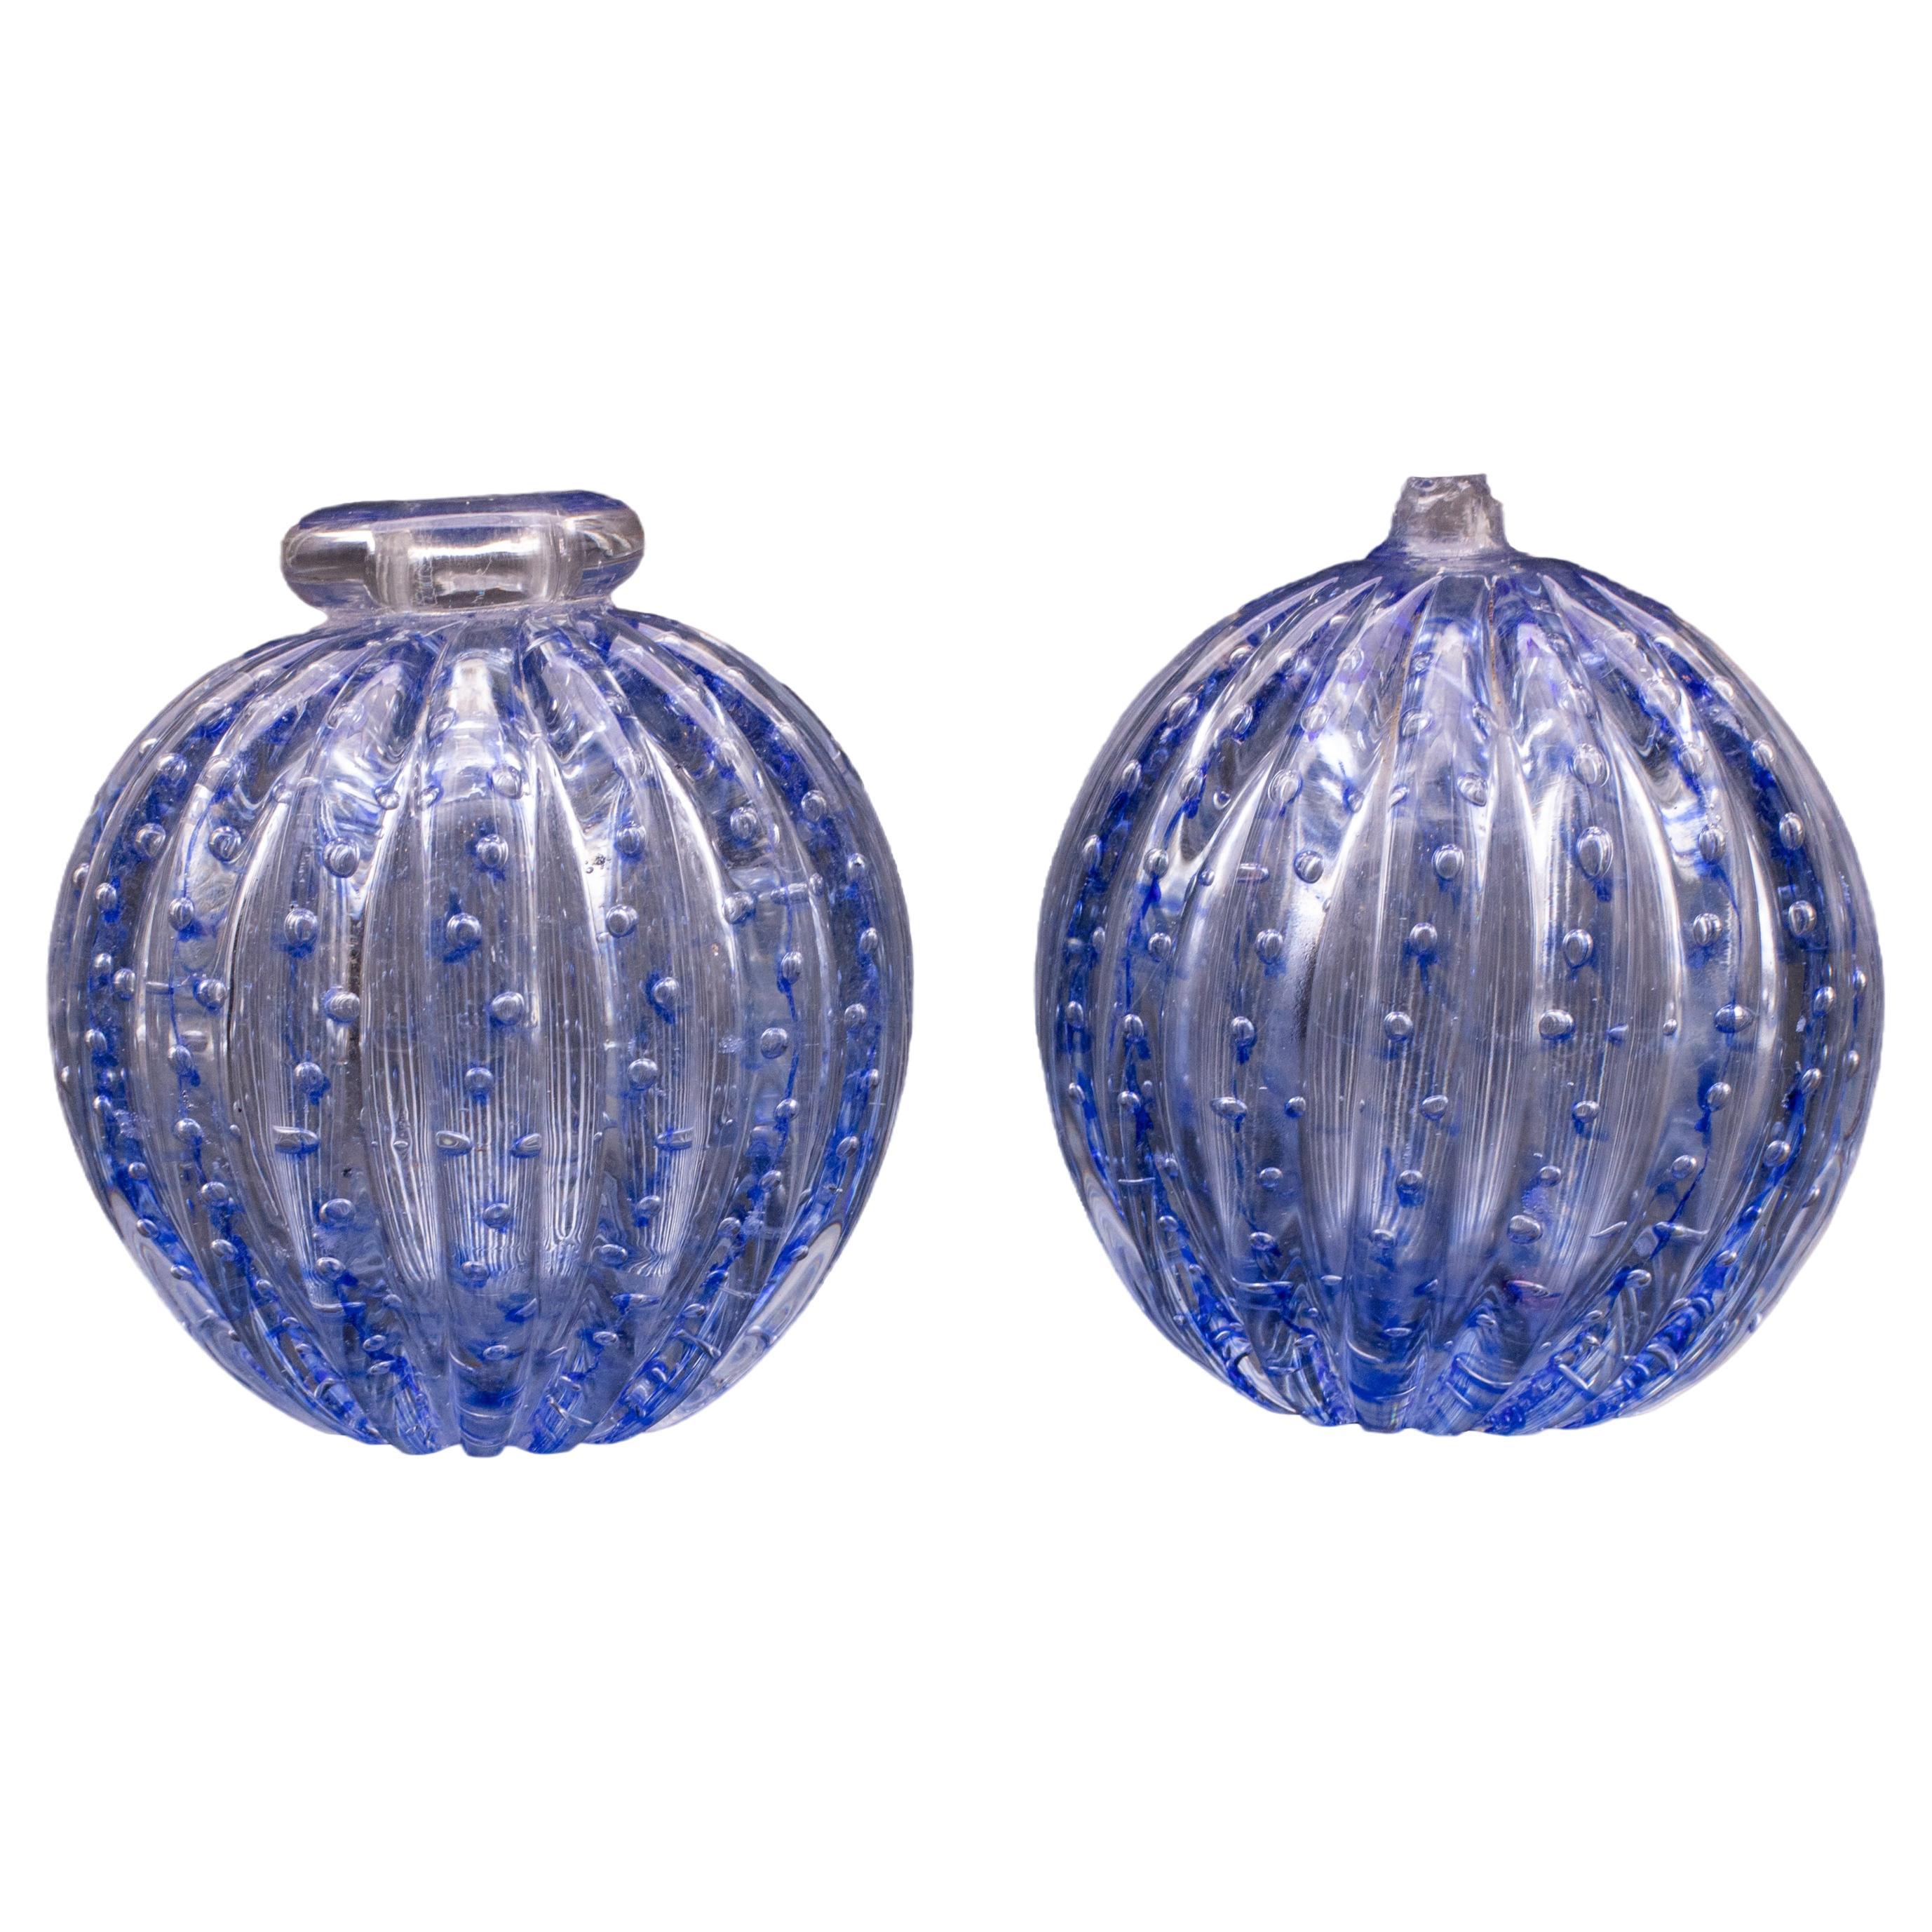 Set of 2 Bubbles Blu Vase by Barovier e Toso, 1950s